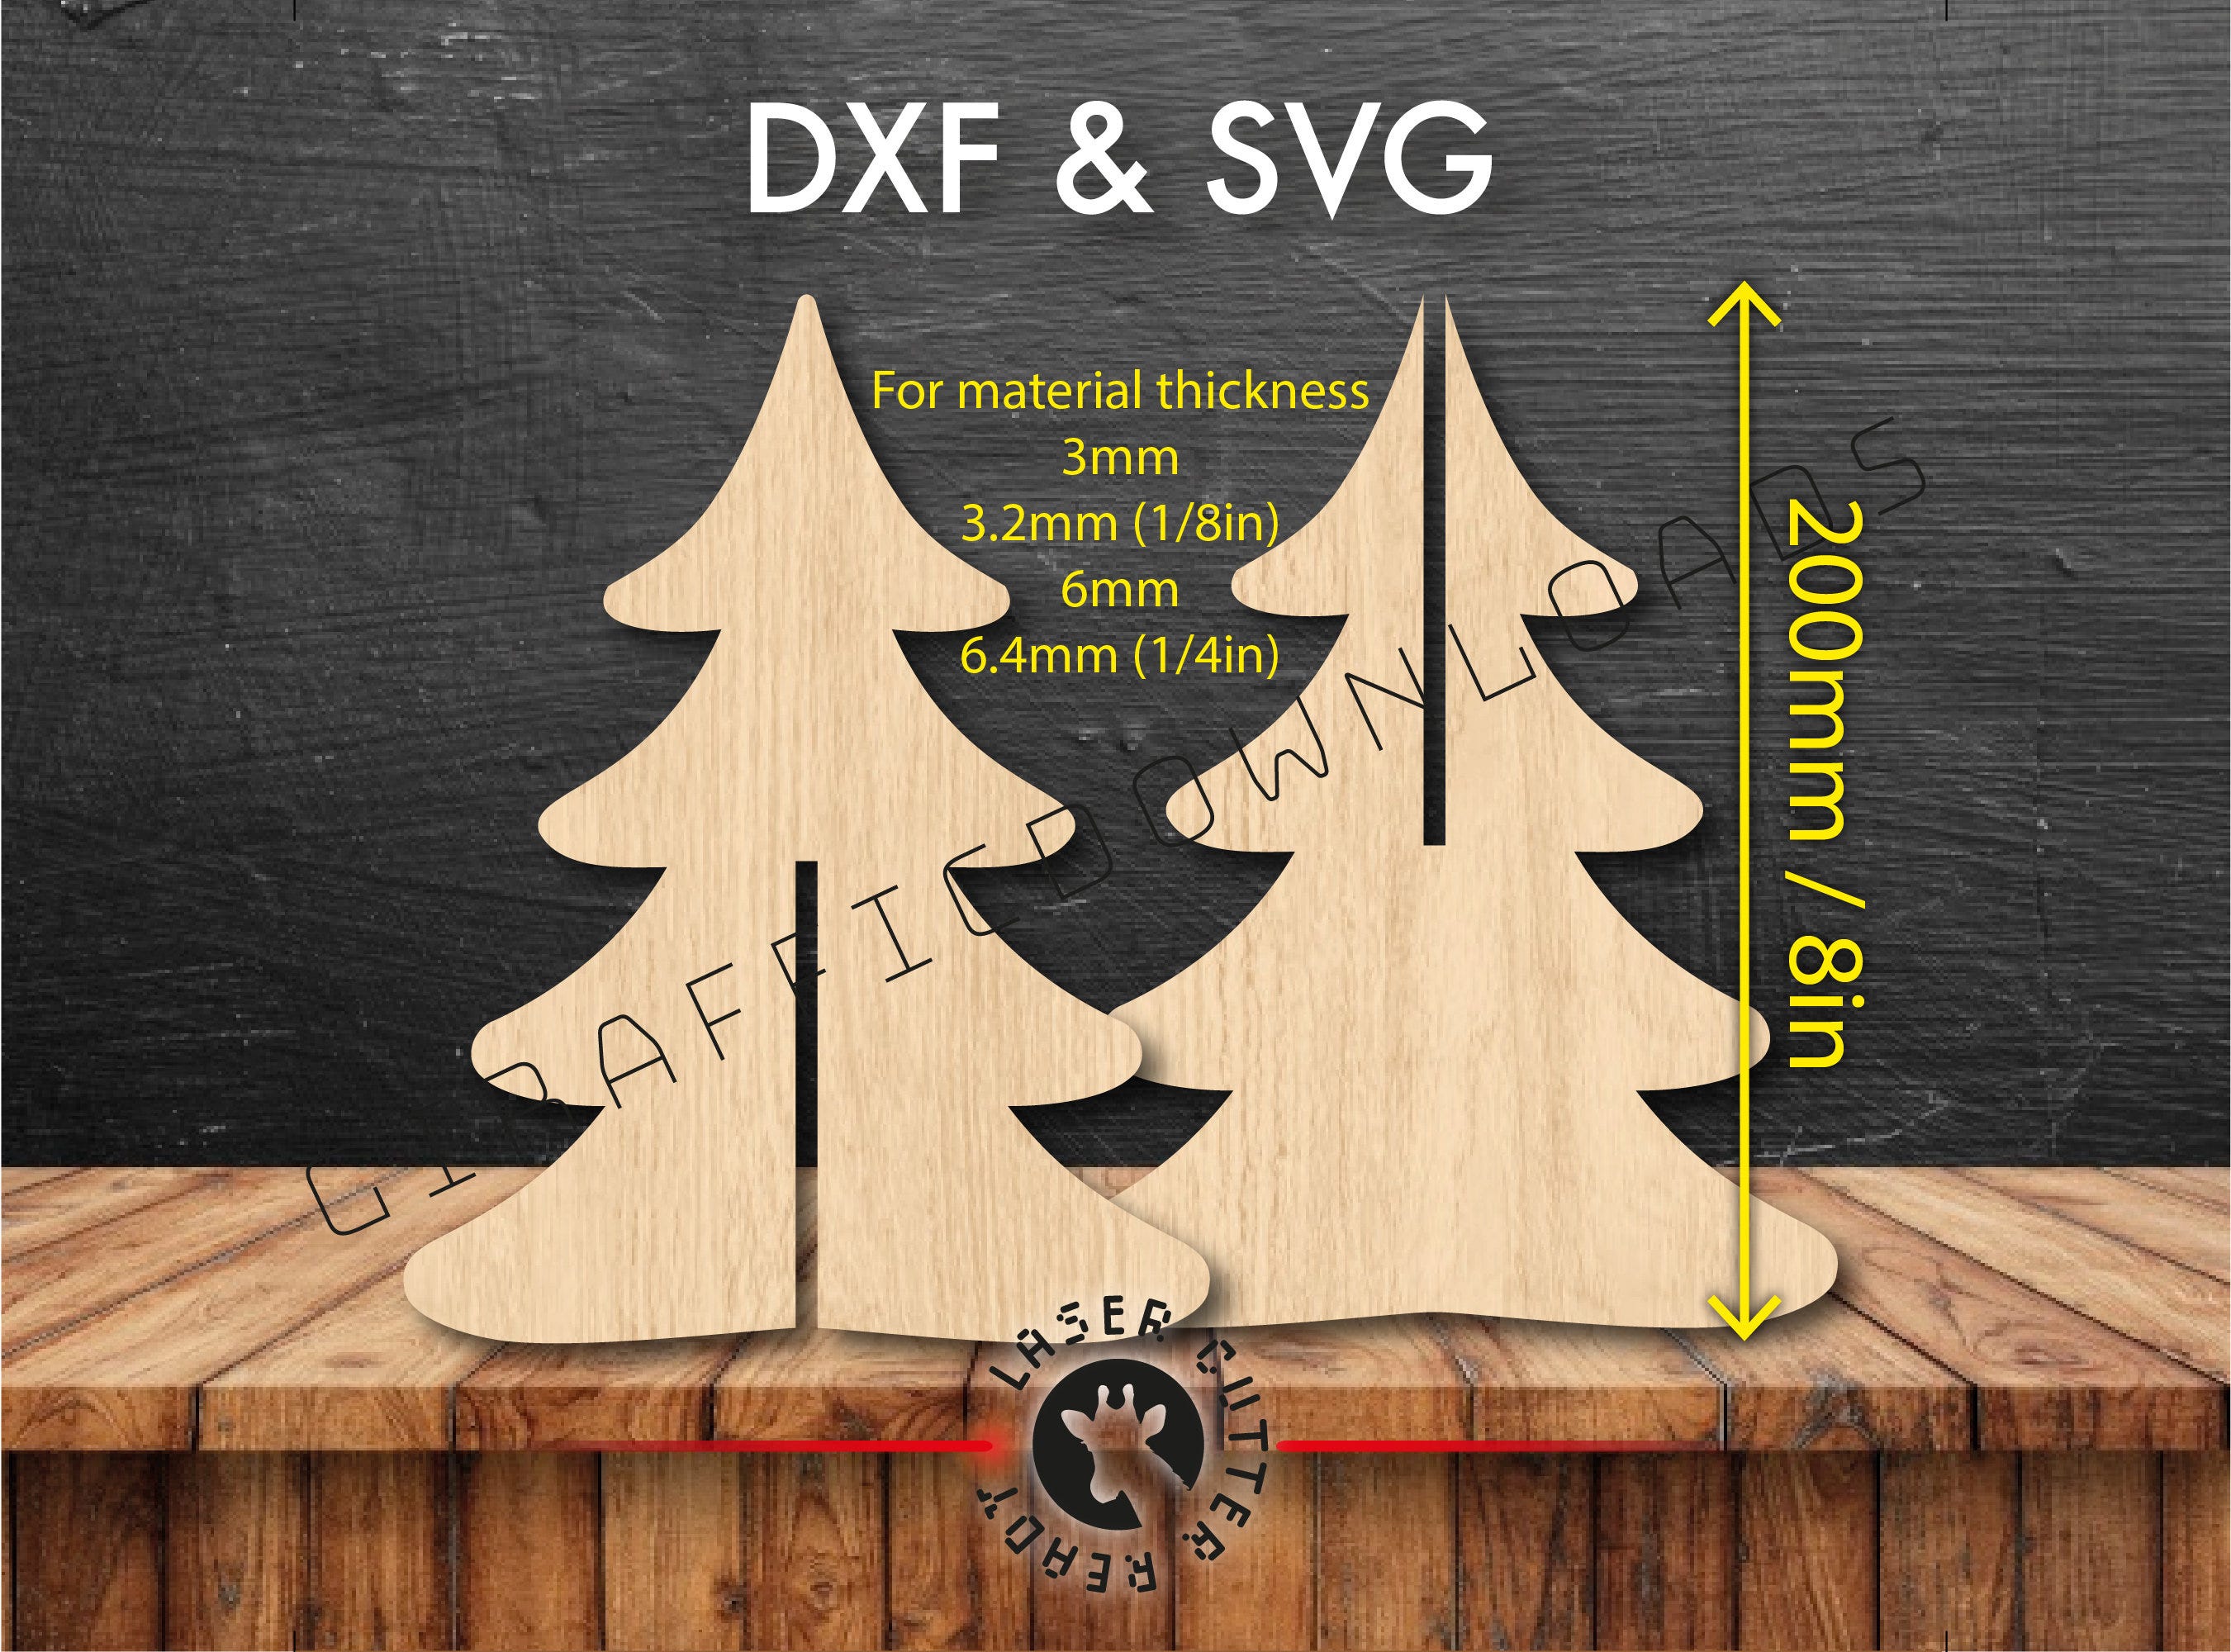 3D 8in / 200mm SVG DXF Christmas Tree file simple cute CNC router cutting cutter digital vector plans template for laser mdf acrylic wood